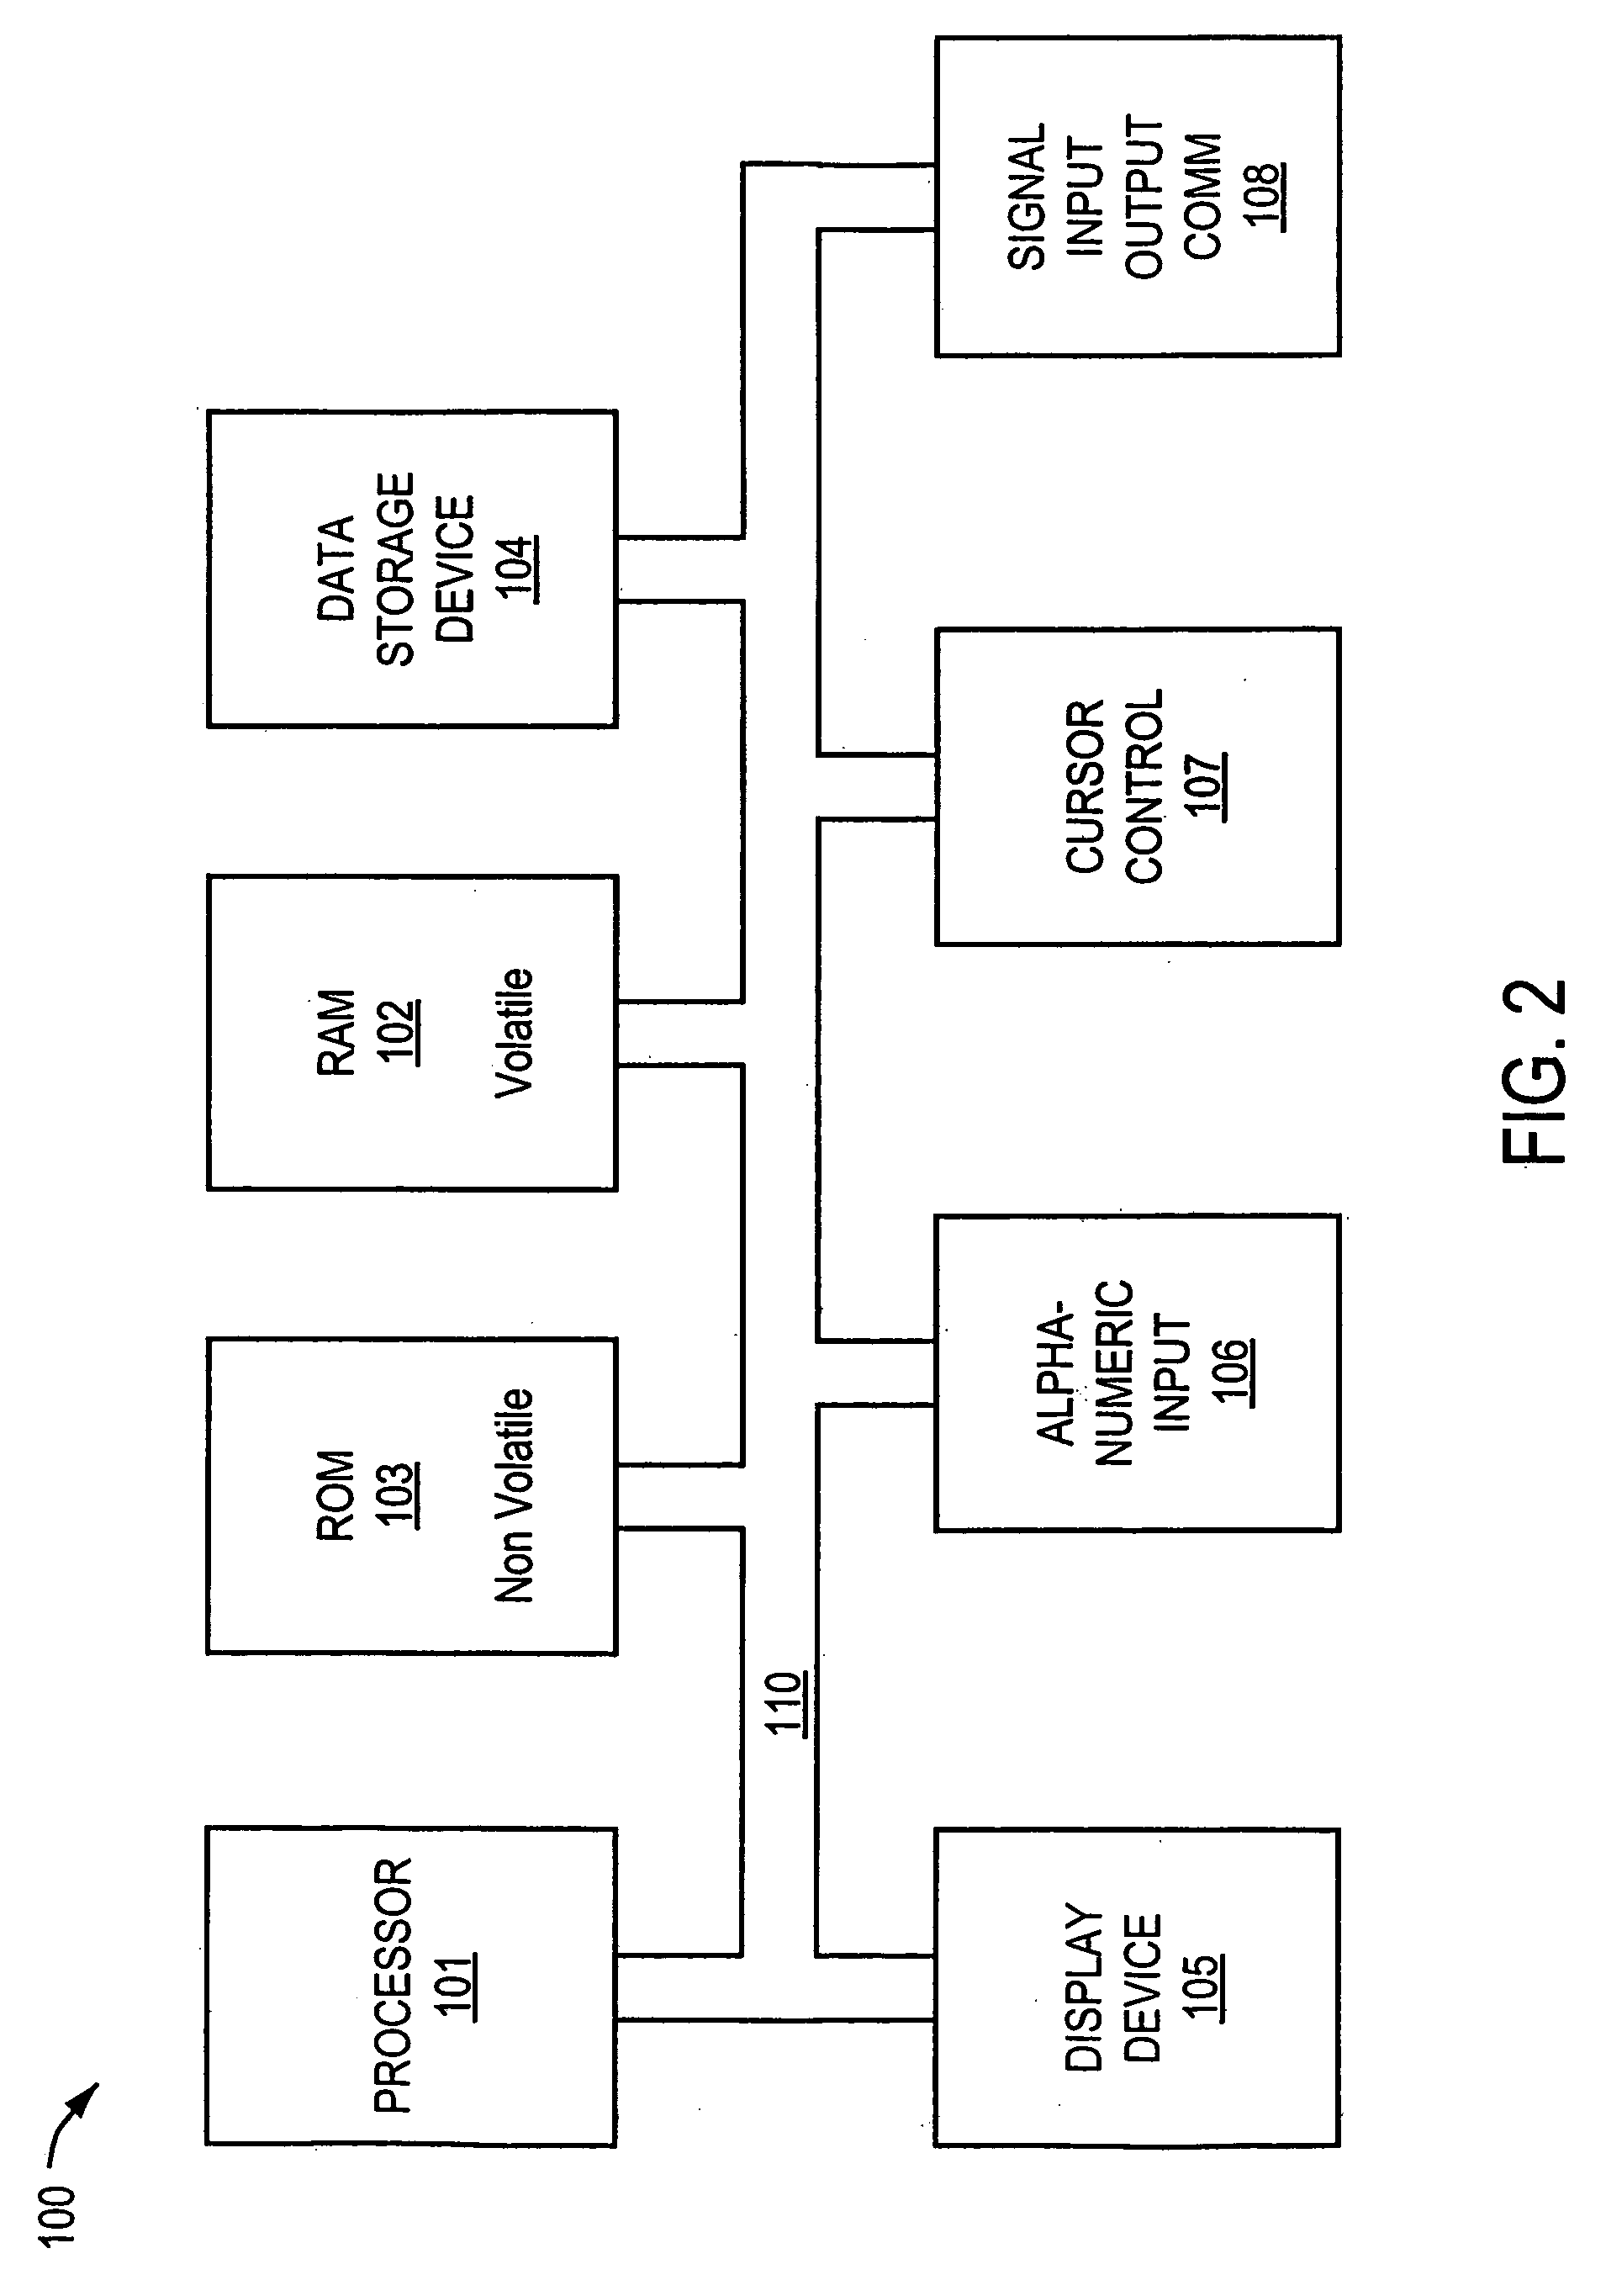 Method of optimizing placement and routing of edge logic in padring layout design